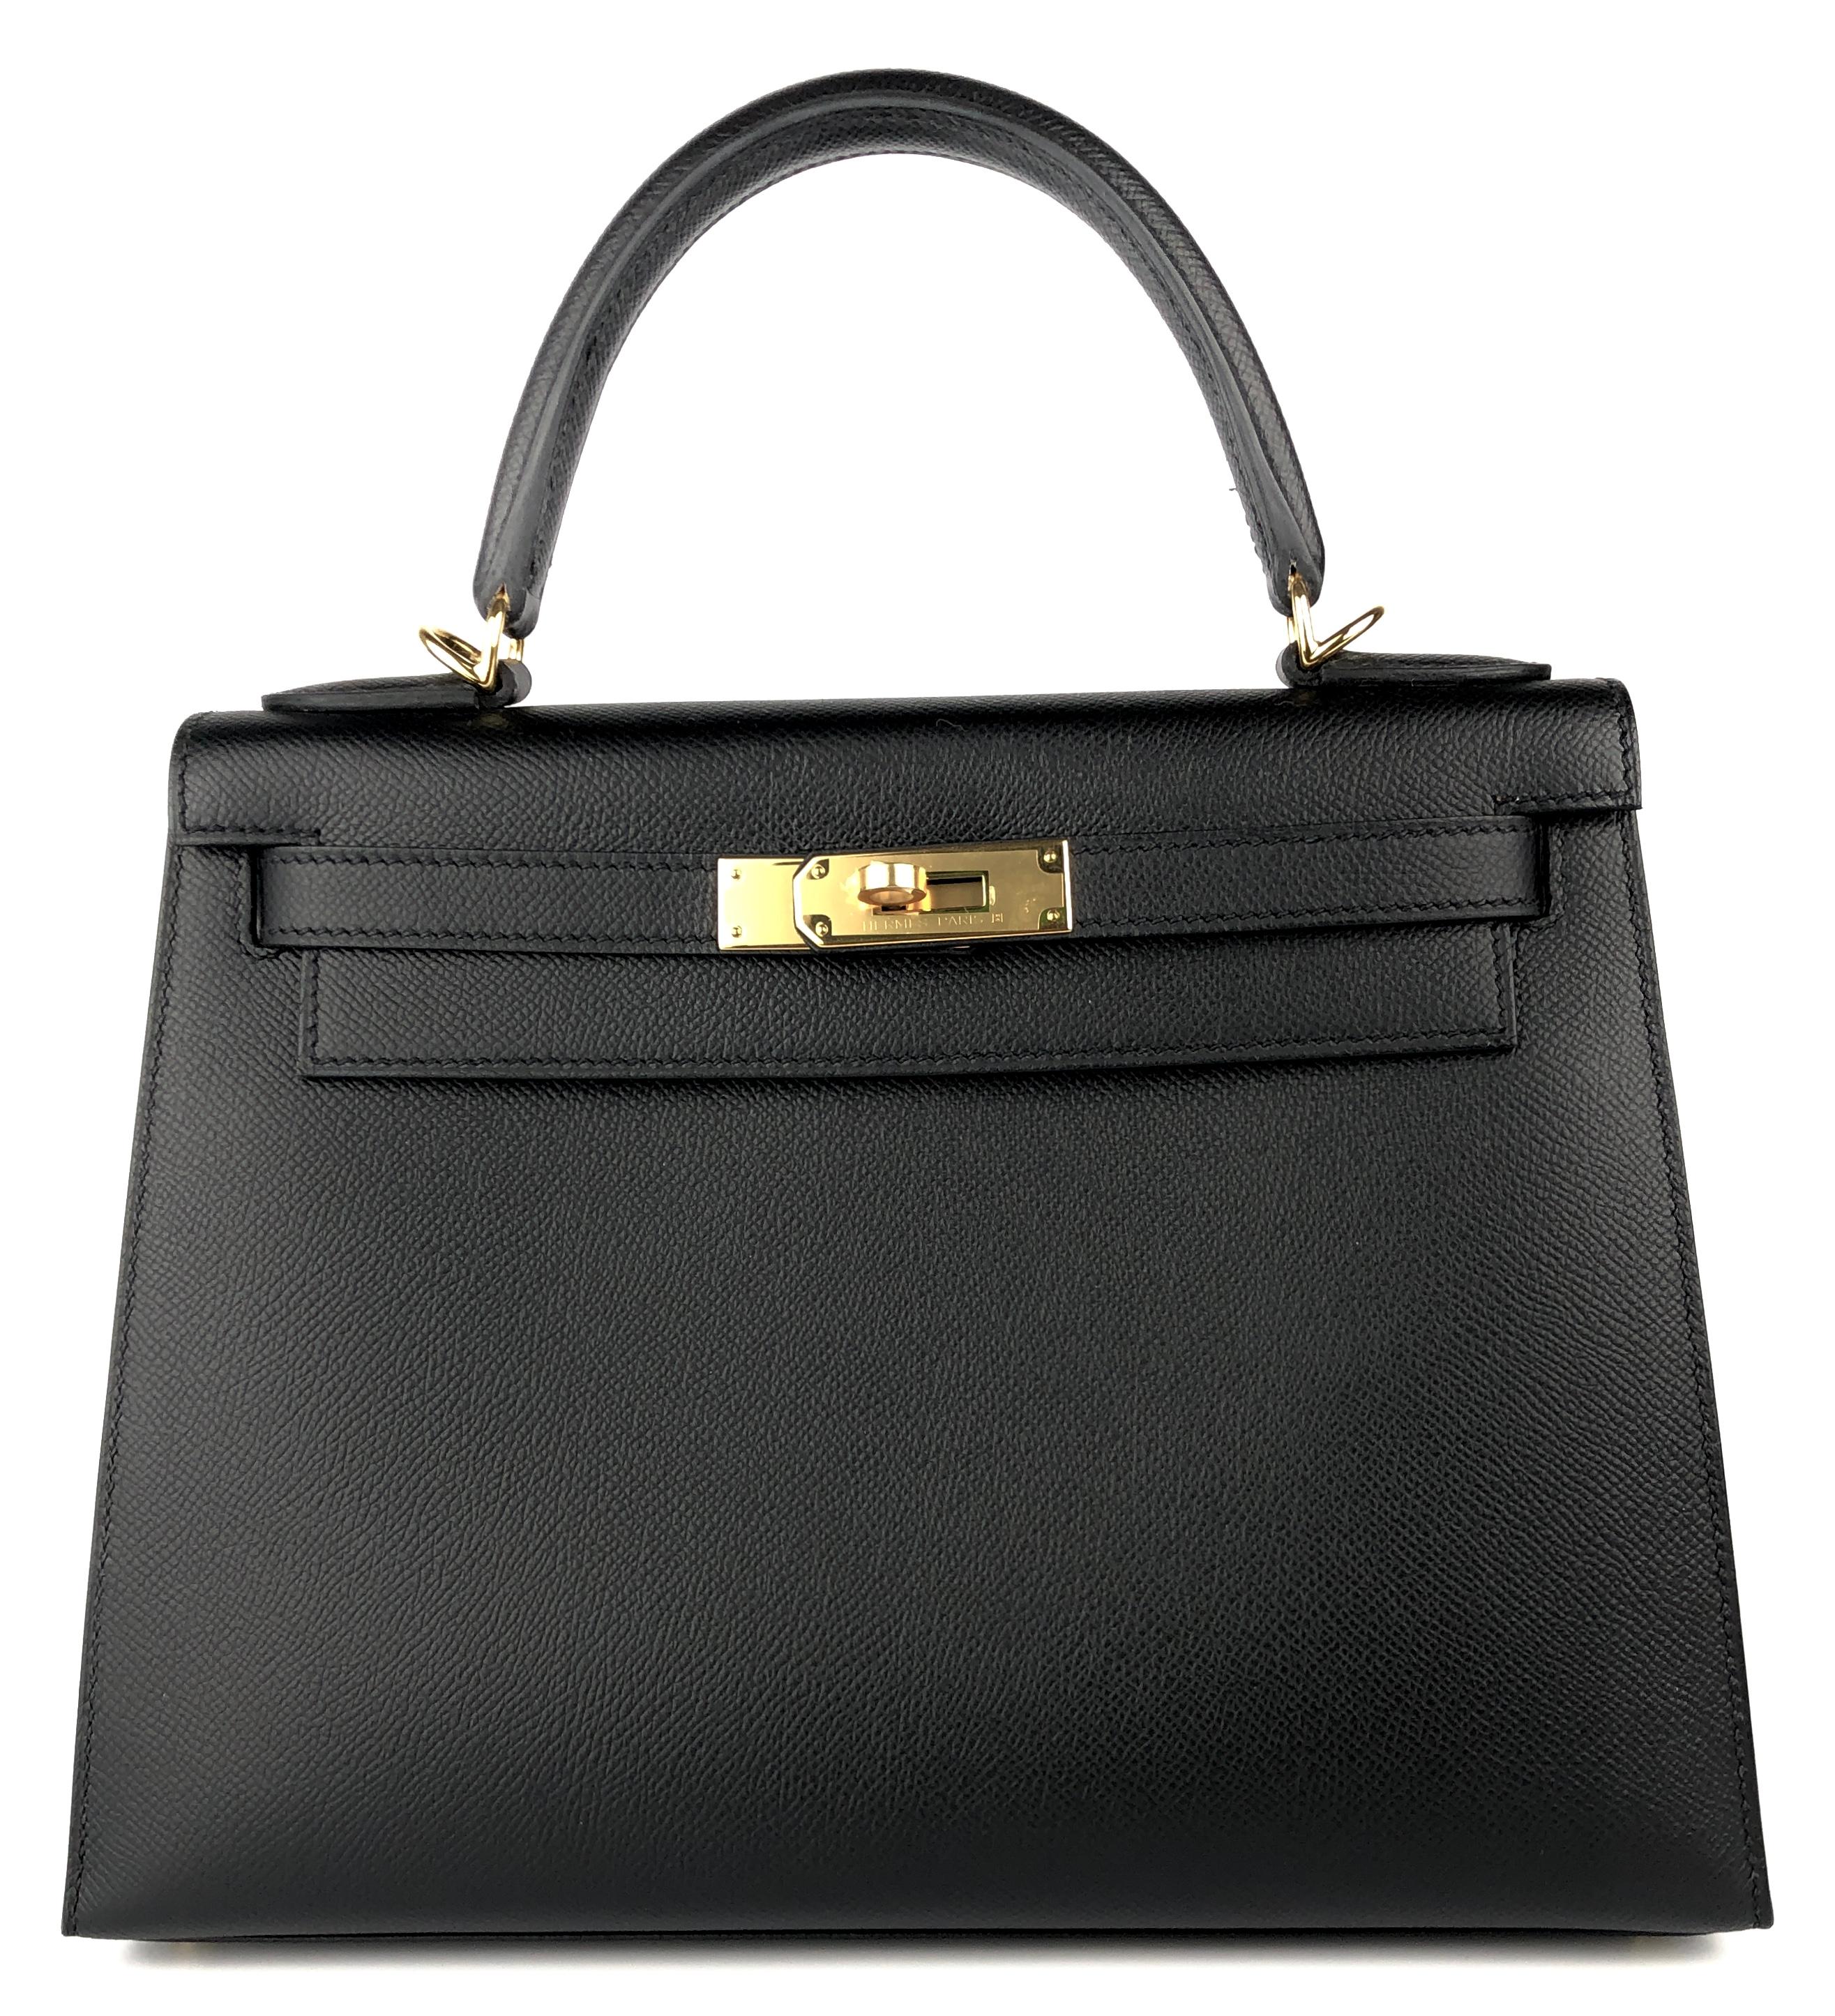 Absolutely Stunning Rare As New Hermes Kelly 28 Sellier Black Noir Epsom Leather complimented by Gold Hardware. As New with Plastic on all hardware and feet. 2019 D Stamp. 

Shop with Confidence from Lux Addicts. Authenticity Guaranteed! 

Lux